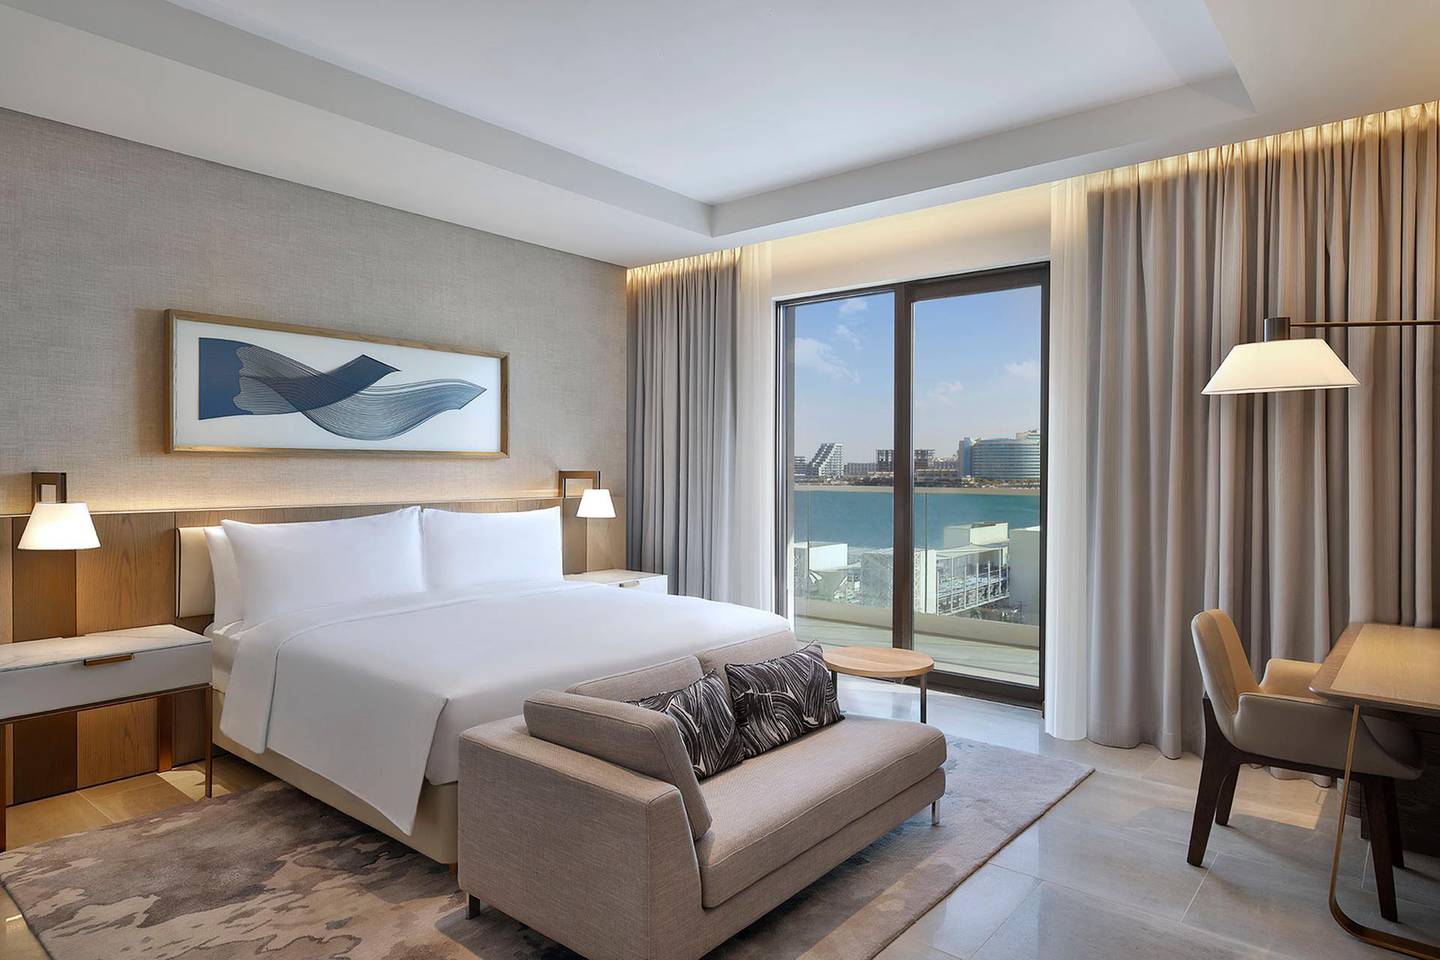 A one-bedroom suite at Hilton Abu Dhabi Yas Island sleeps two adults and two children, has a separate lounge and dining area, and a spacious balcony with bay views. Courtesy Hilton